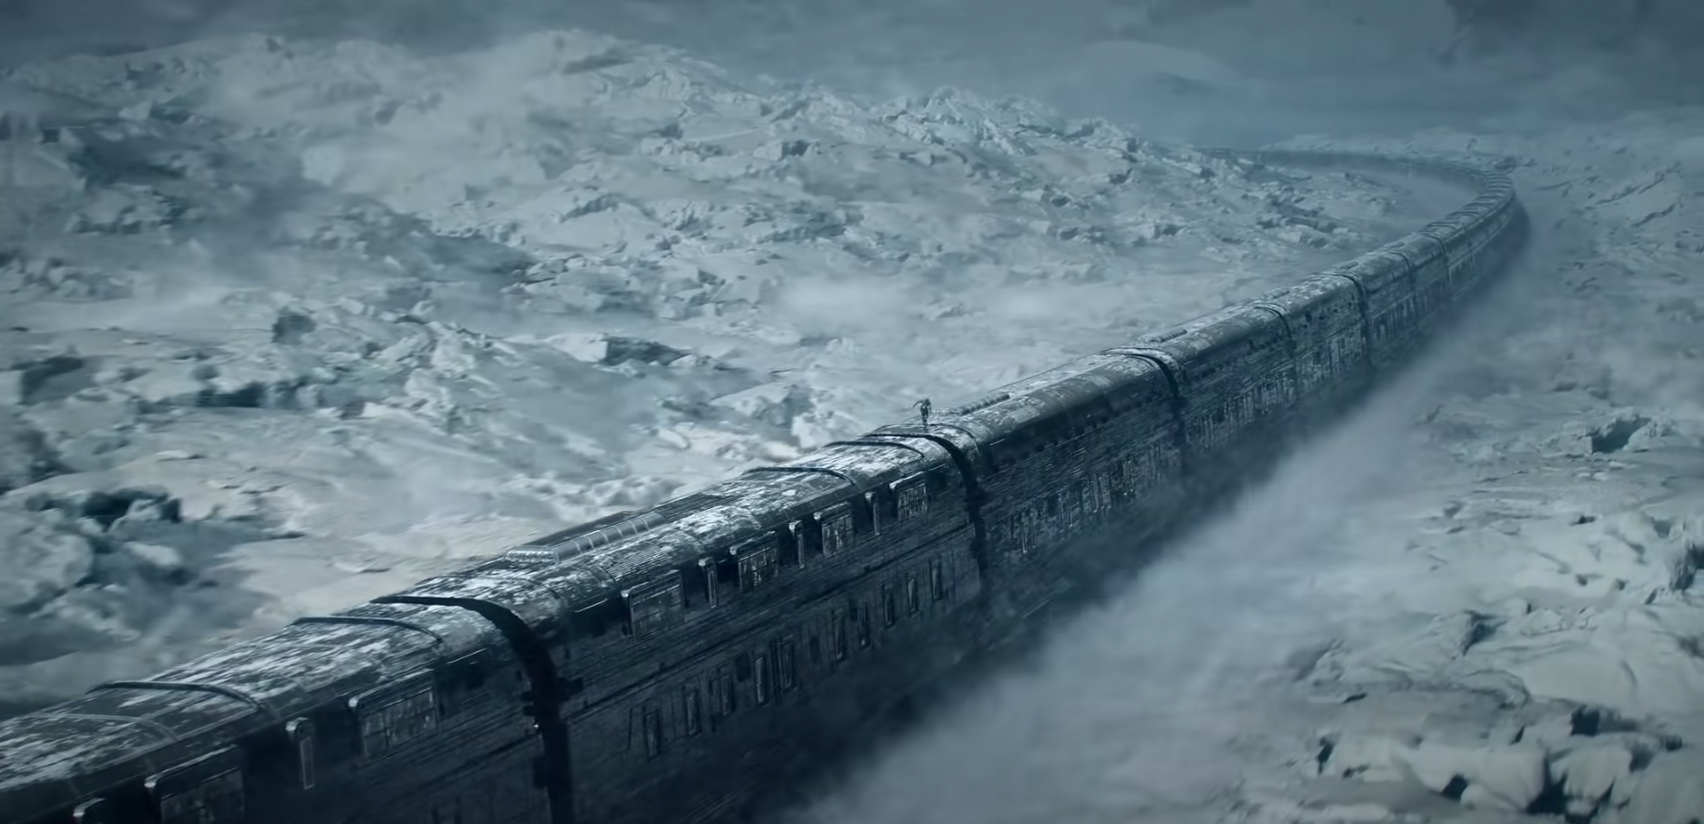 Can we exit this dystopian train already? Alas, Snowpiercer & apocalyptic  fare keep chugging along